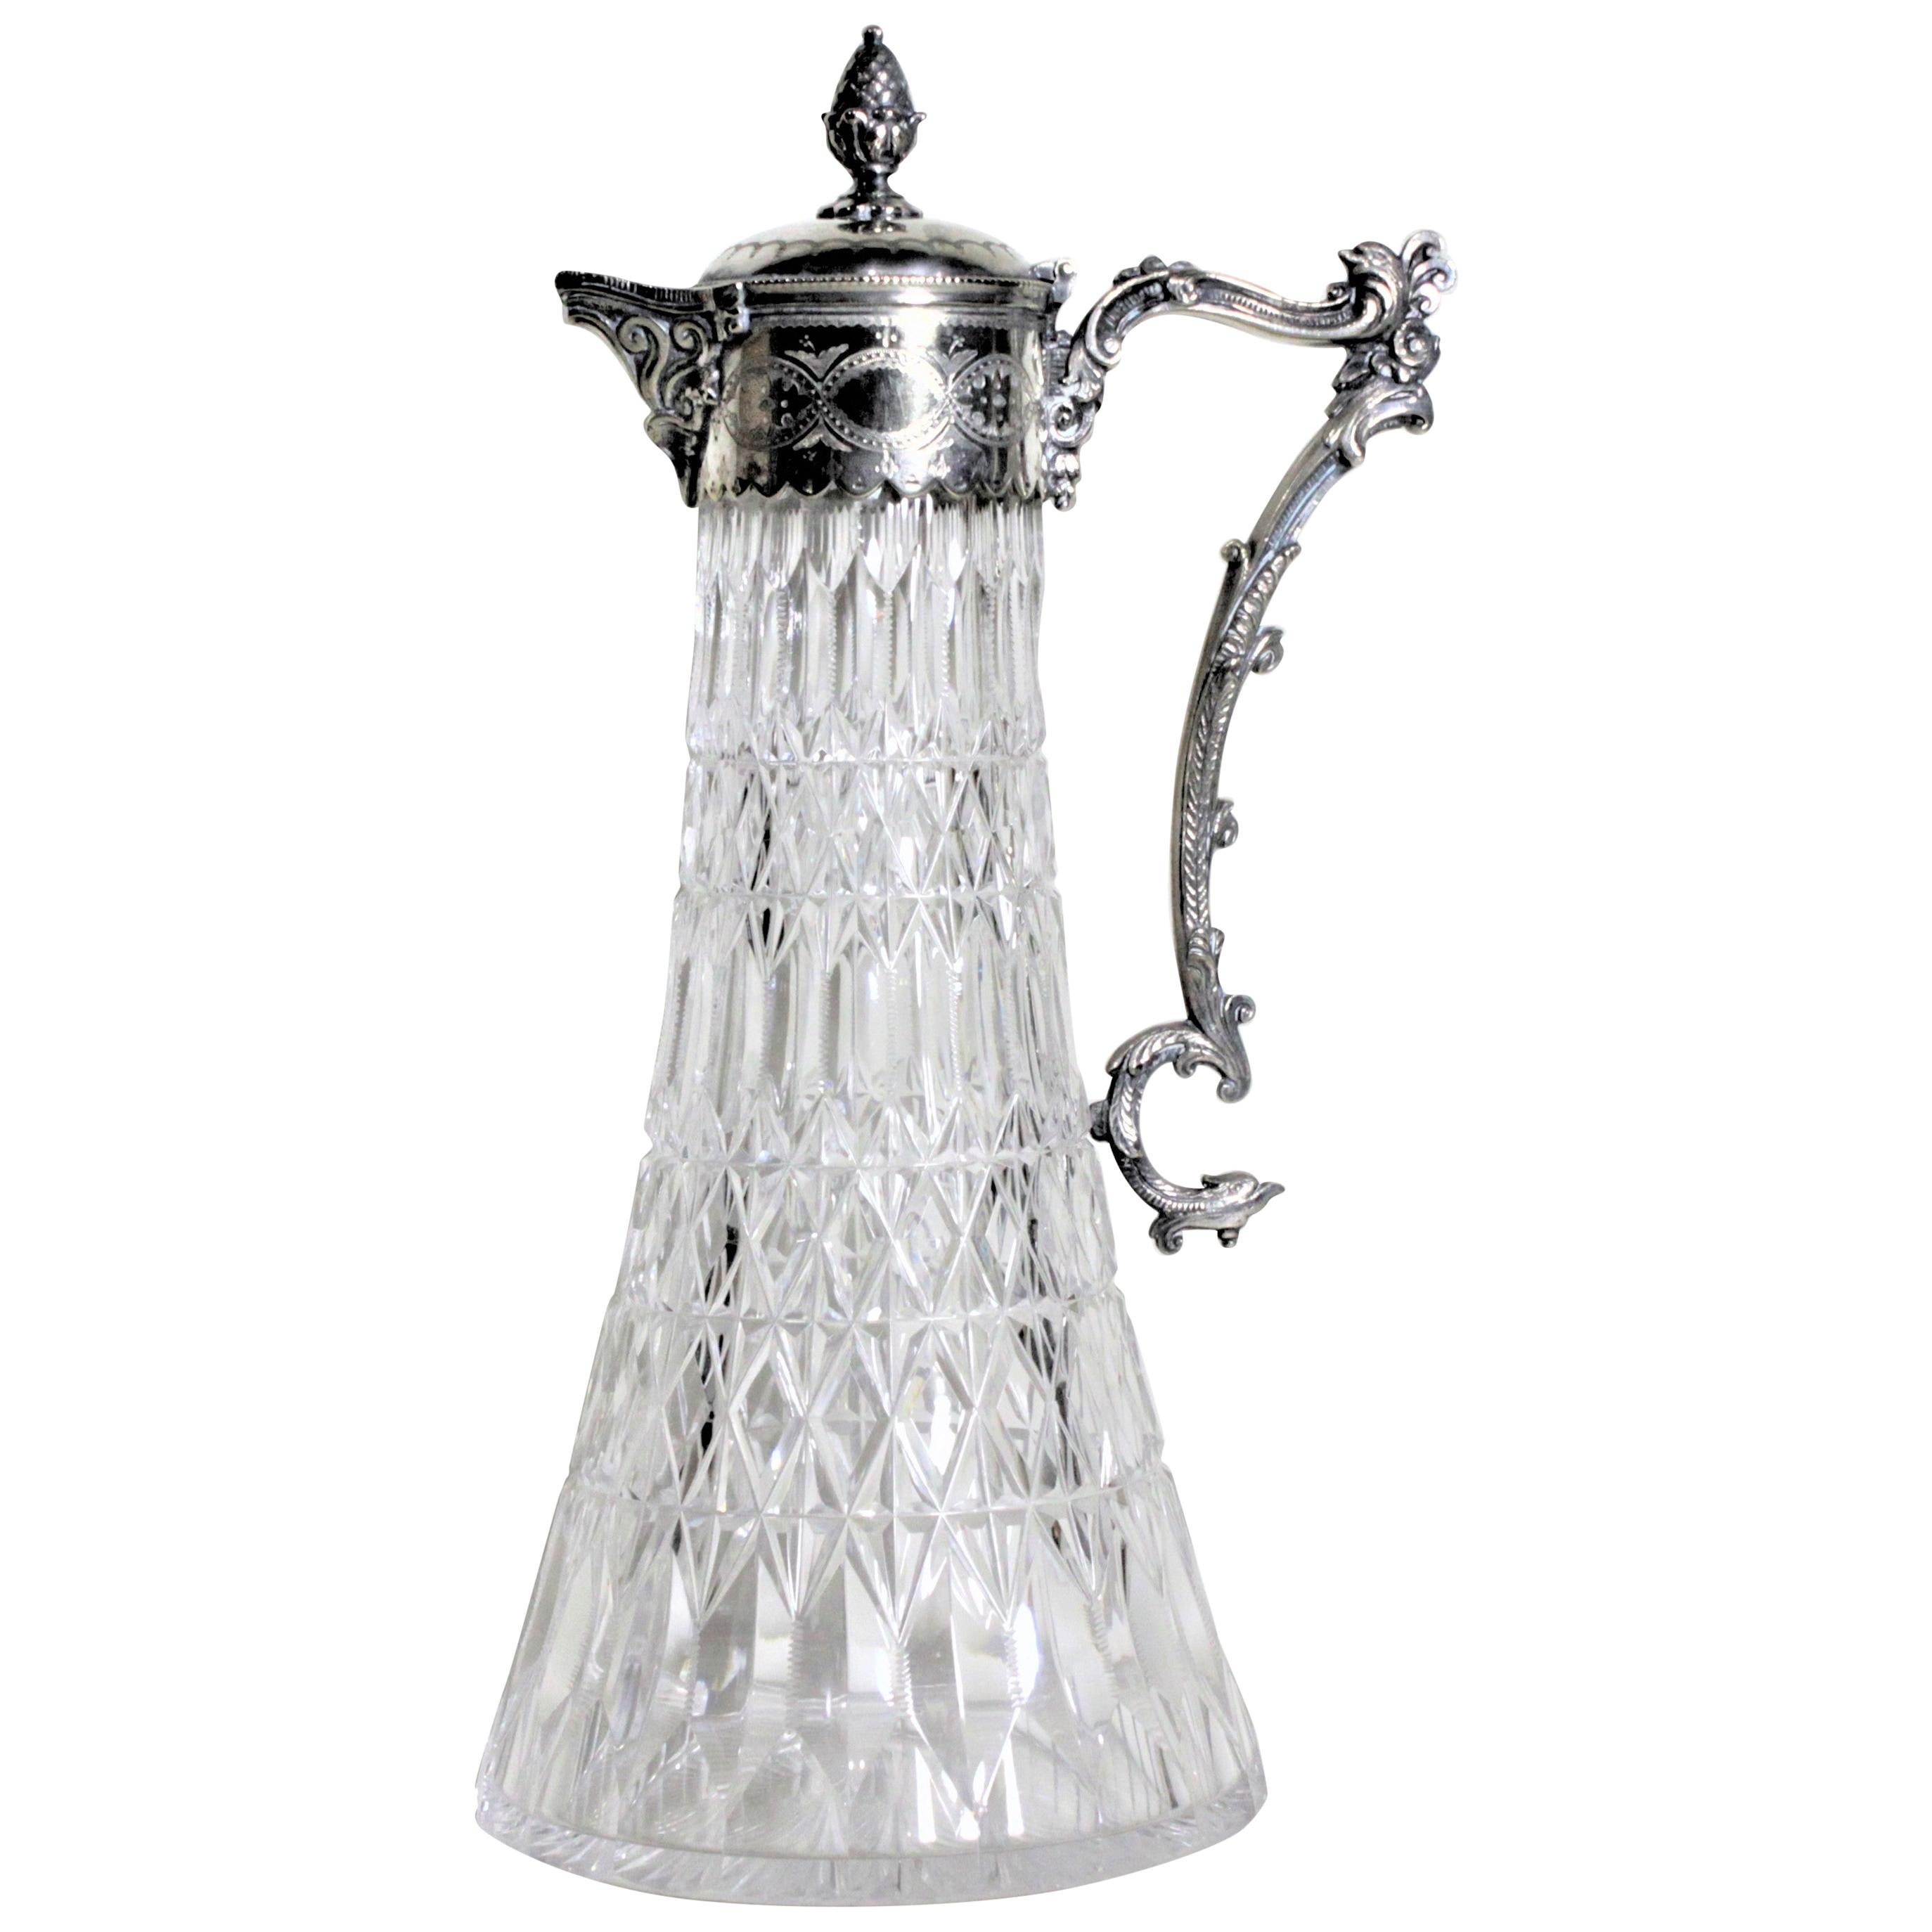 Antique English Silver Plated & Cut Crystal Claret Jug or Decanter